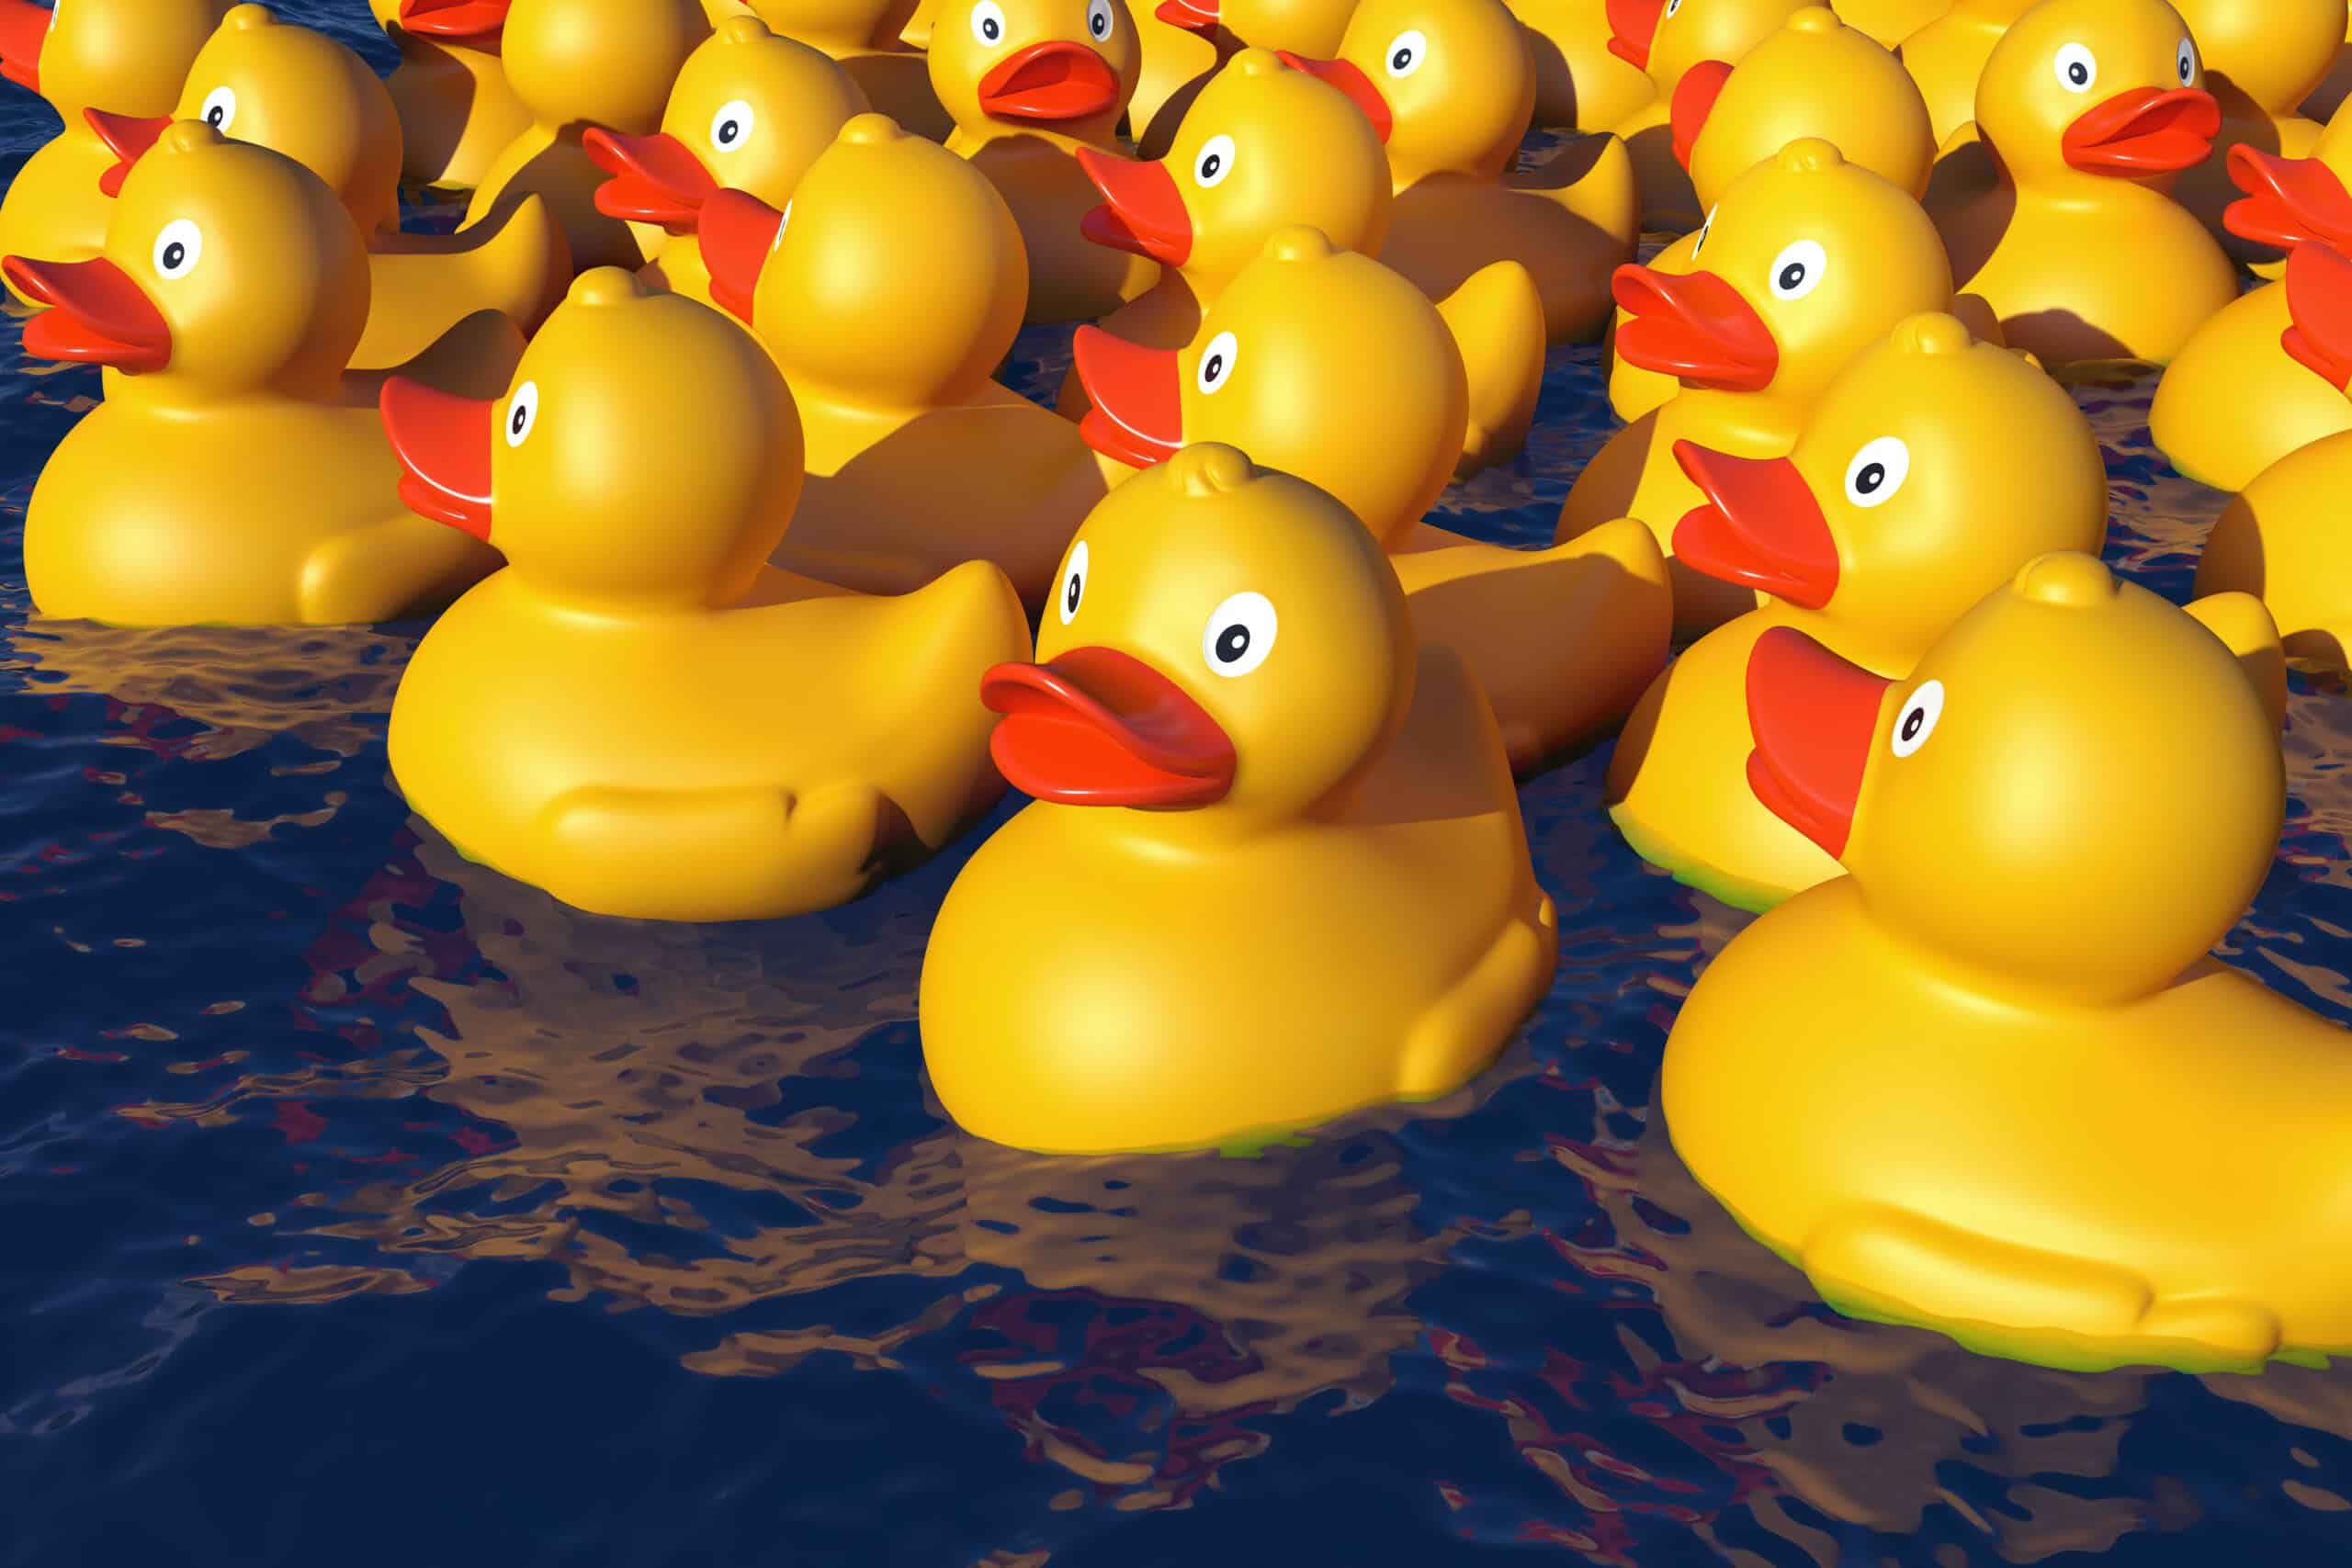 Many rubber ducks in the water